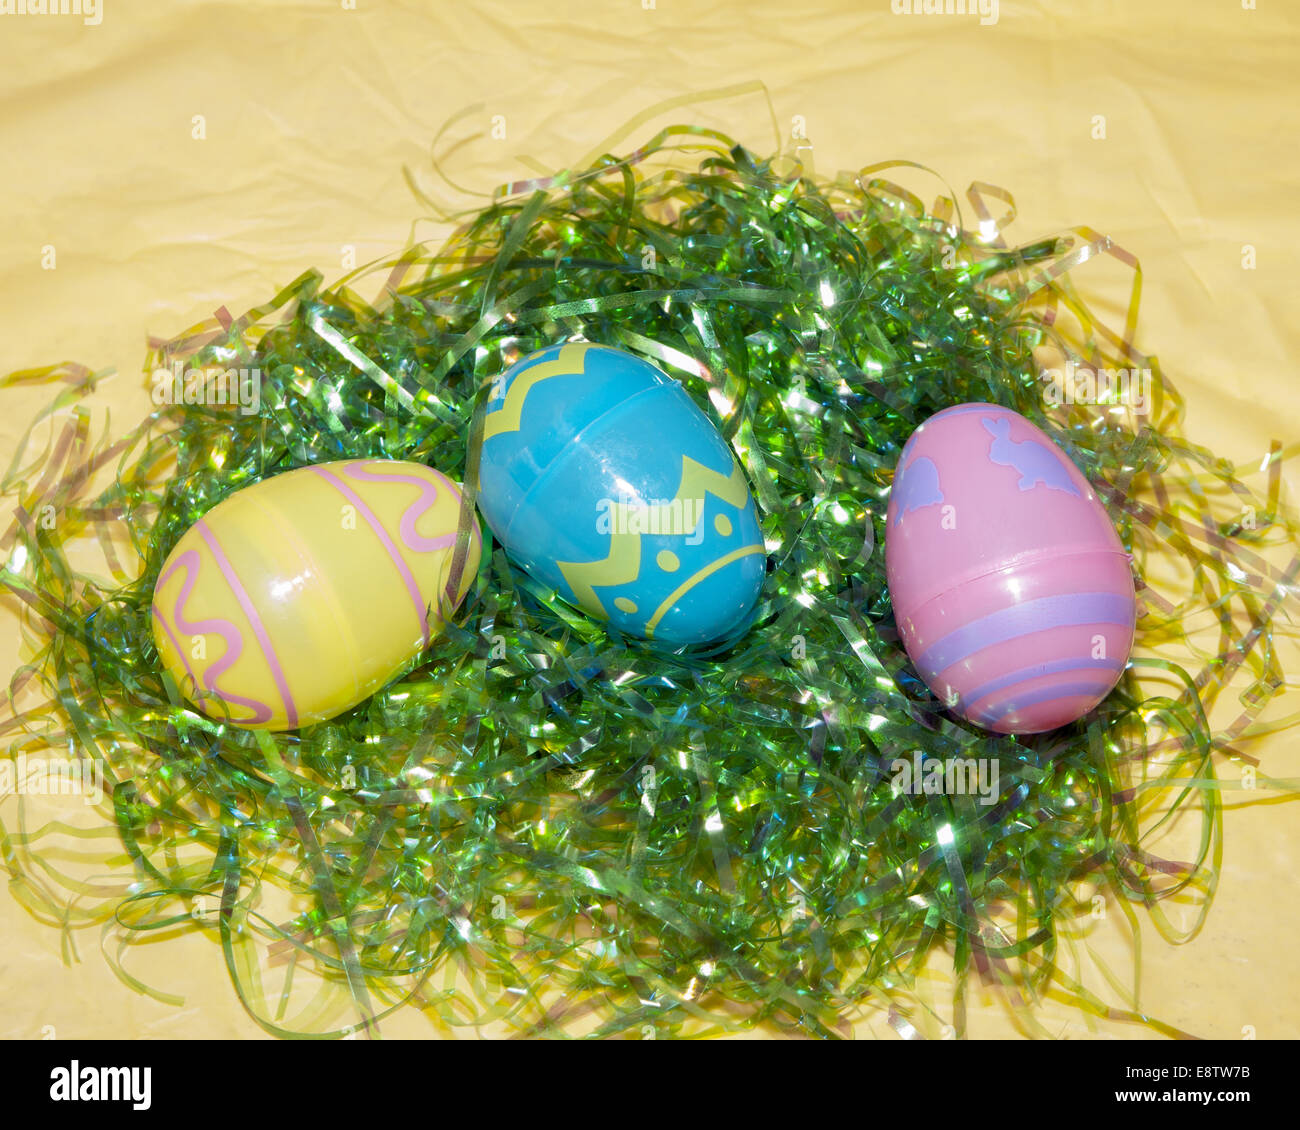 3 plastic easter eggs on green easter grass on a yellow table cloth Stock Photo